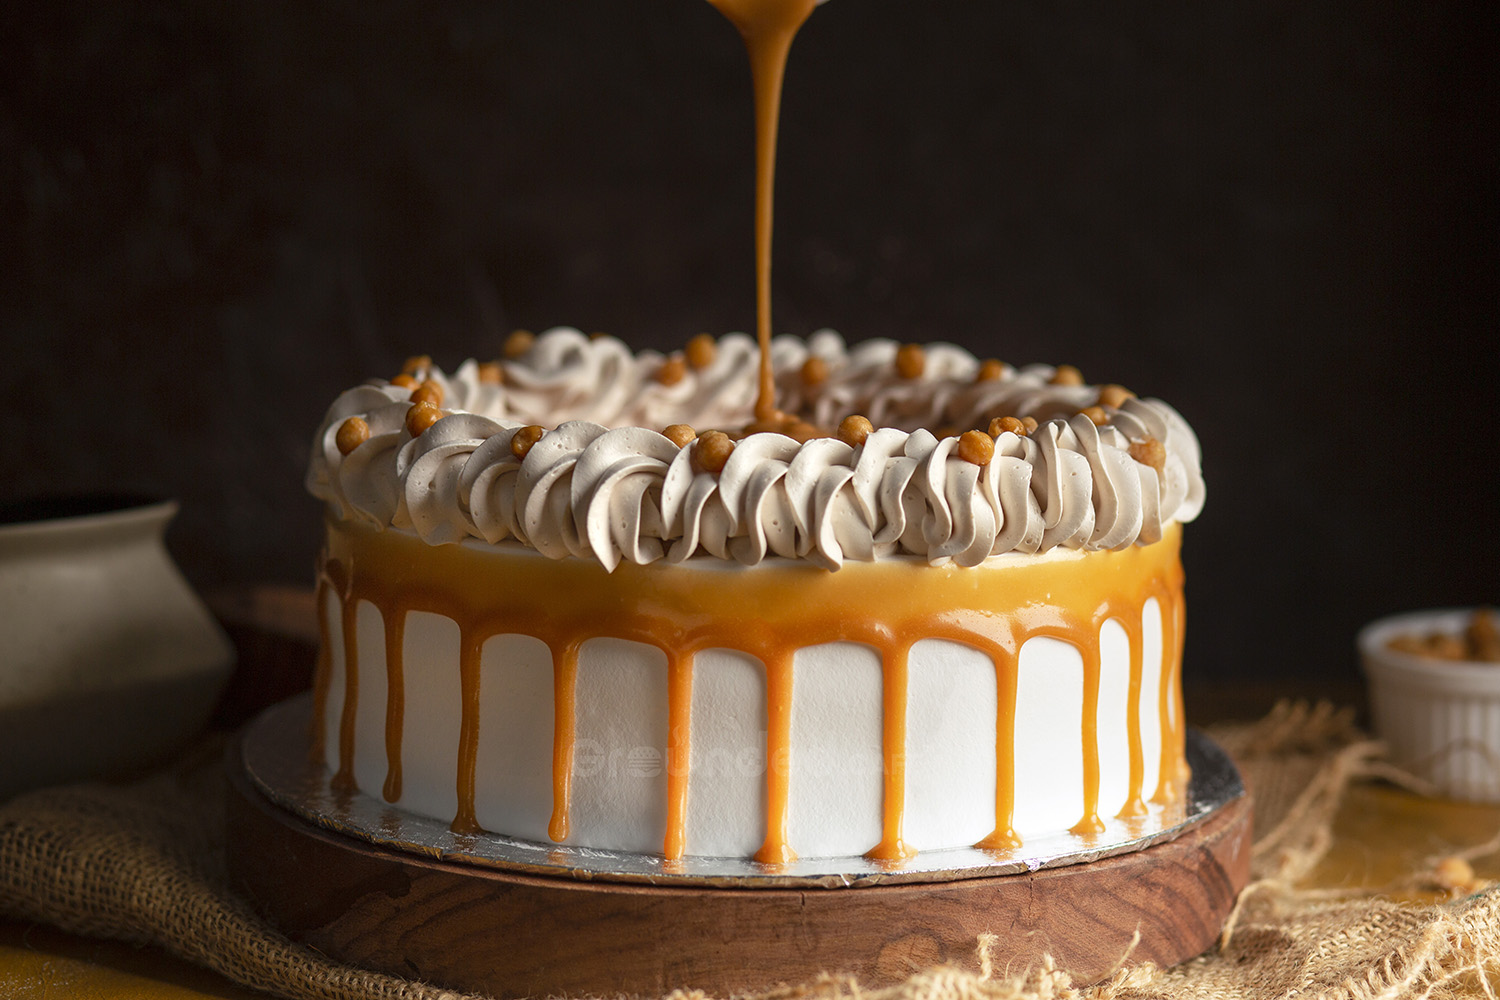 Buy Butterscotch Cake Online at Grounded.cafe - Premium Cake Shop